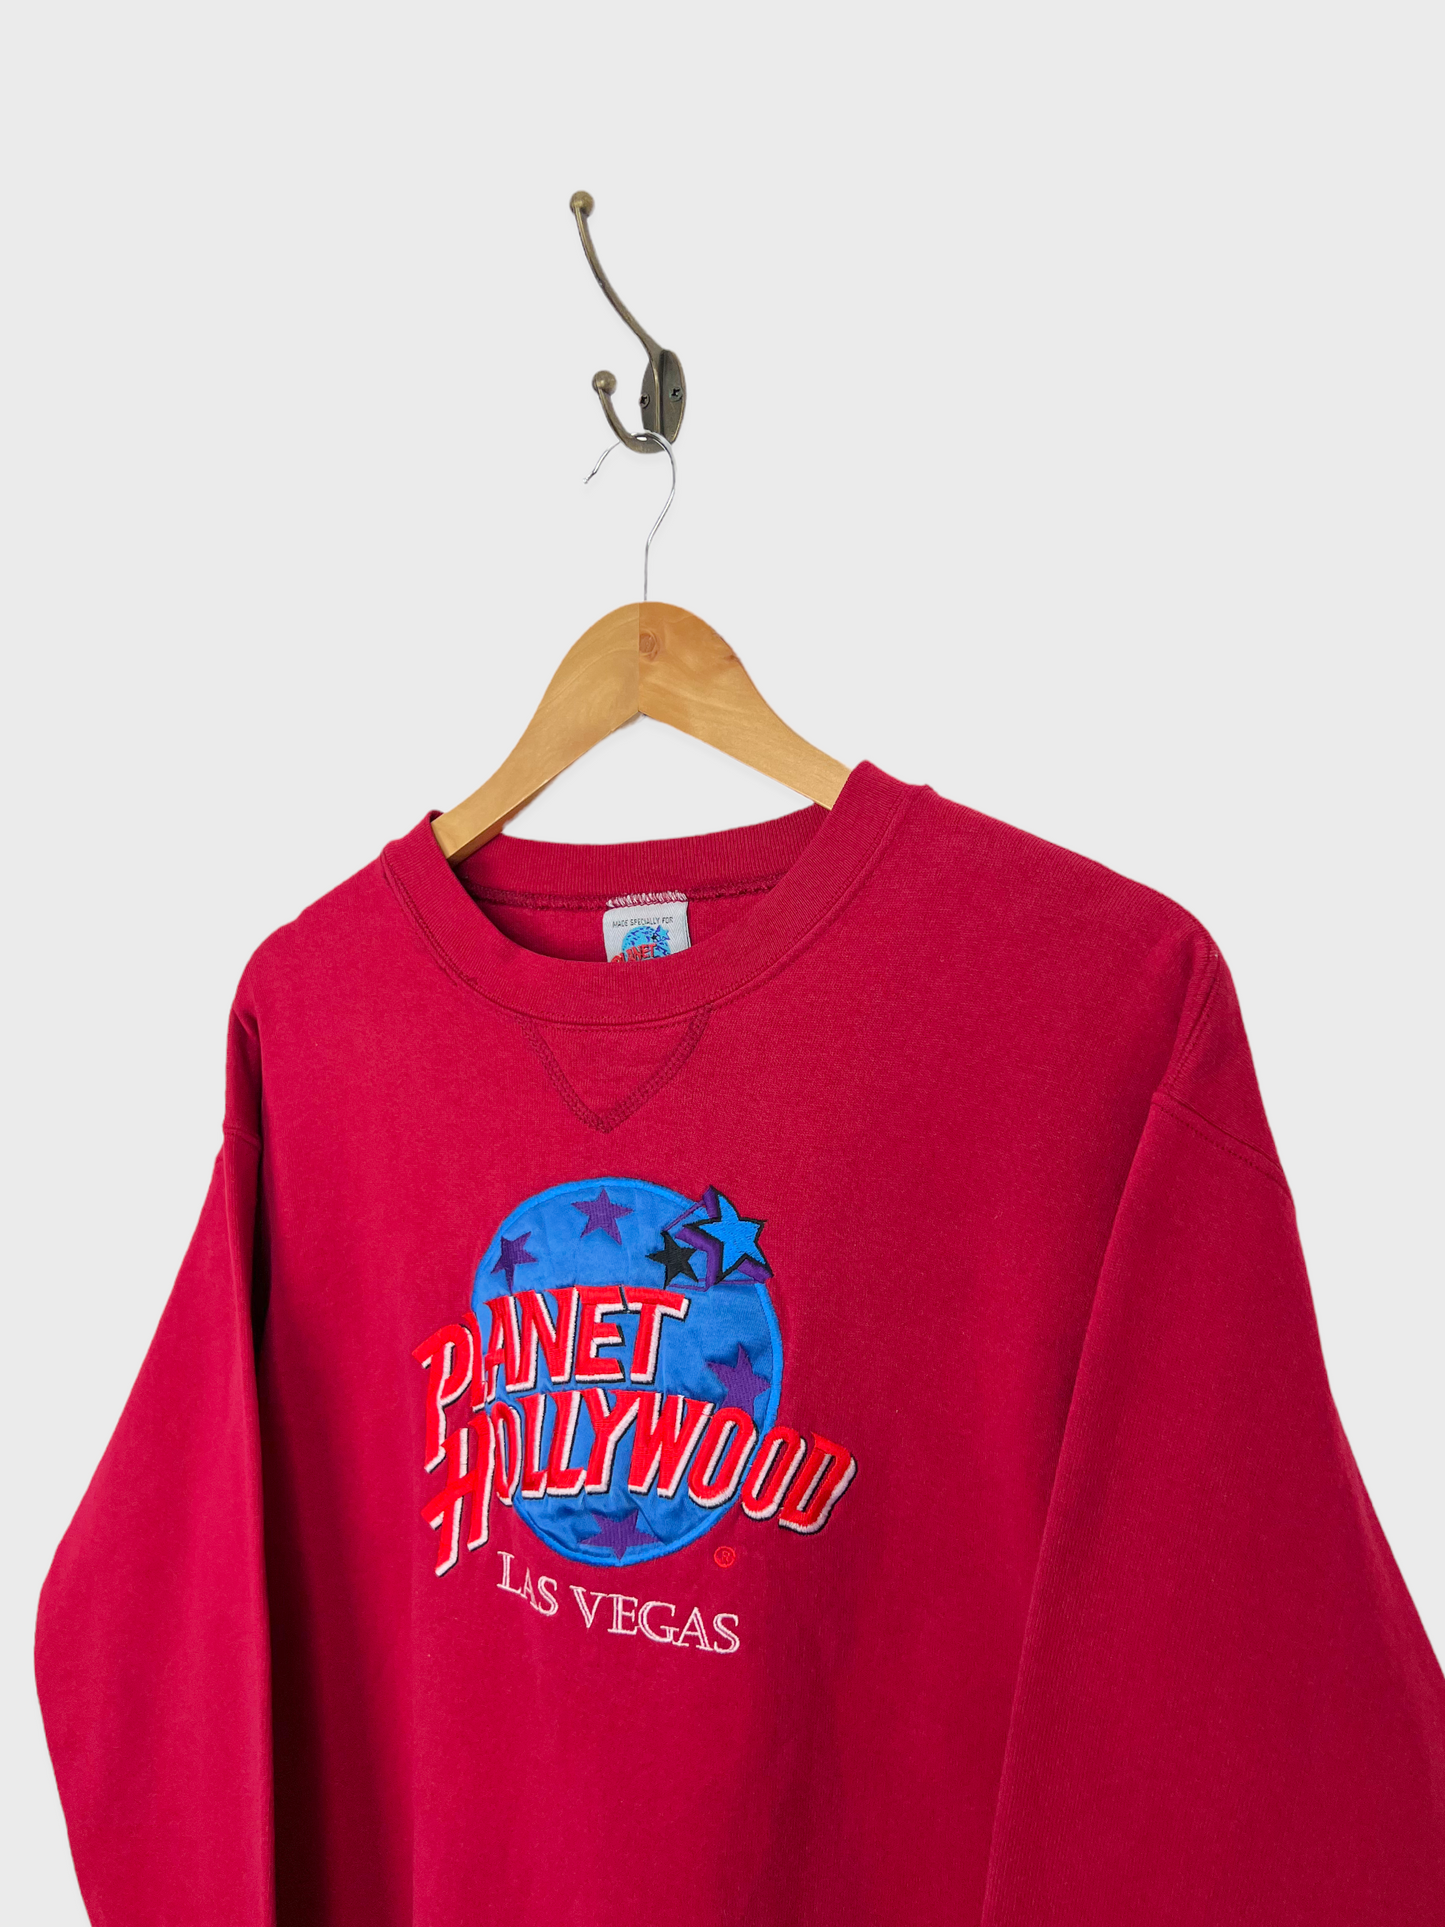 90's Planet Hollywood USA Made Embroidered Vintage Sweatshirt Size 12